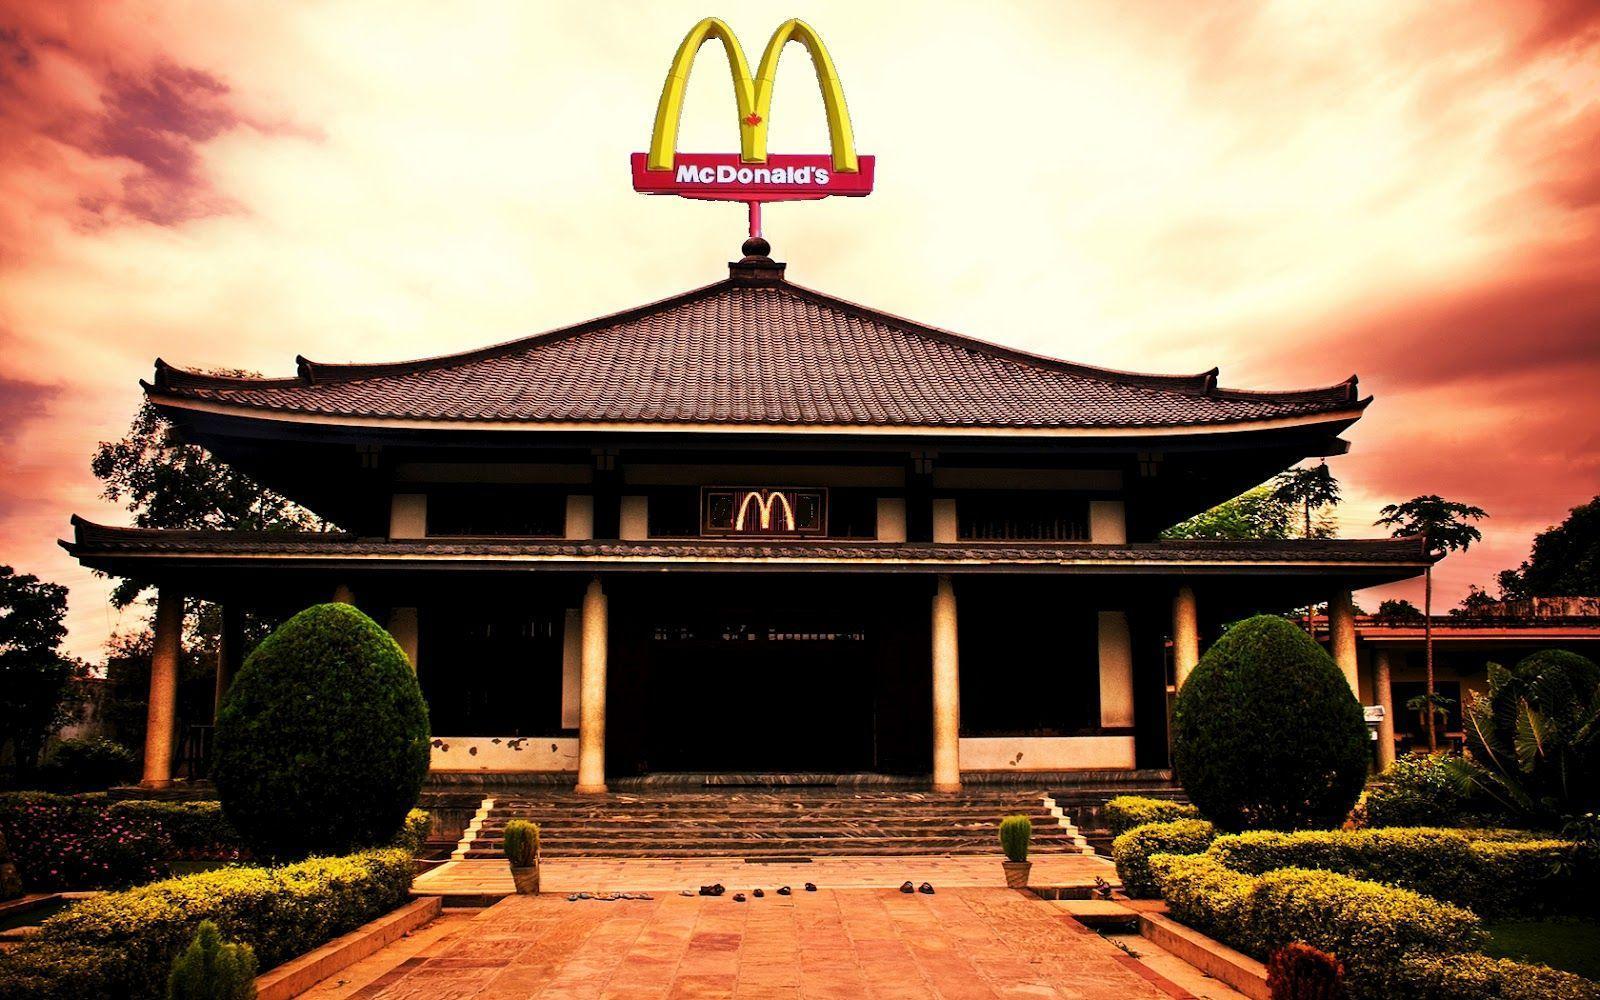 MCDONALDS ADS AND DELICIOUS HD WALLPAPERS For Windows 7